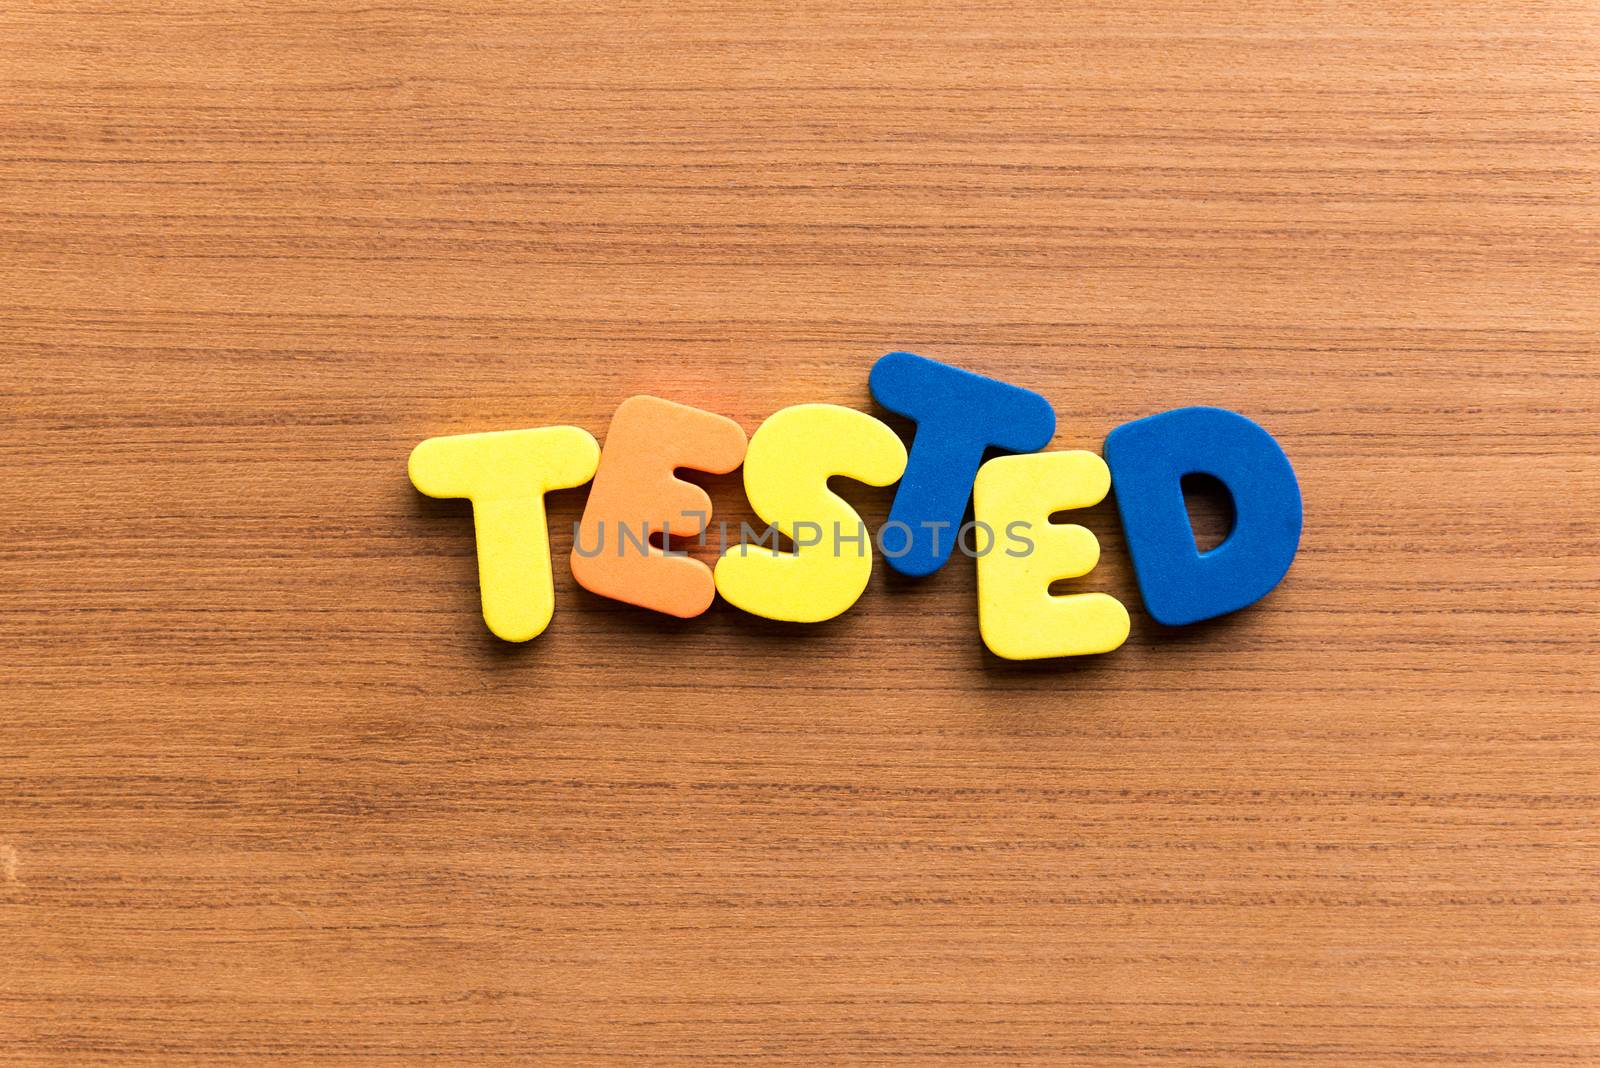 tested colorful word on the wooden background